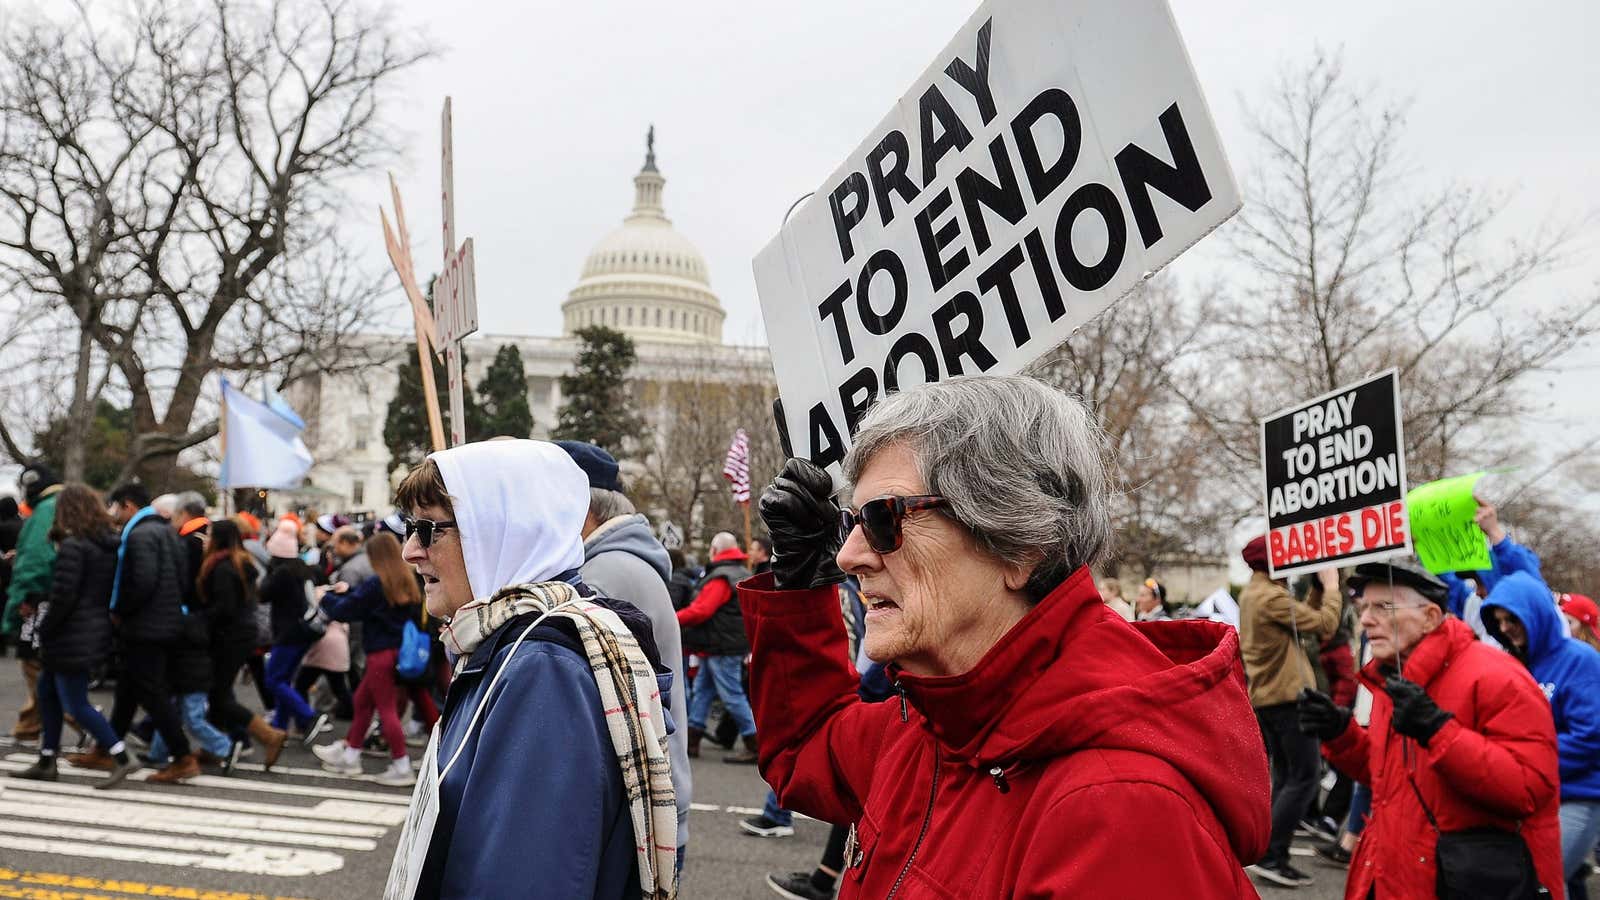 Abortion has long divided the American public. With this pandemic, one side may well get what it wants.